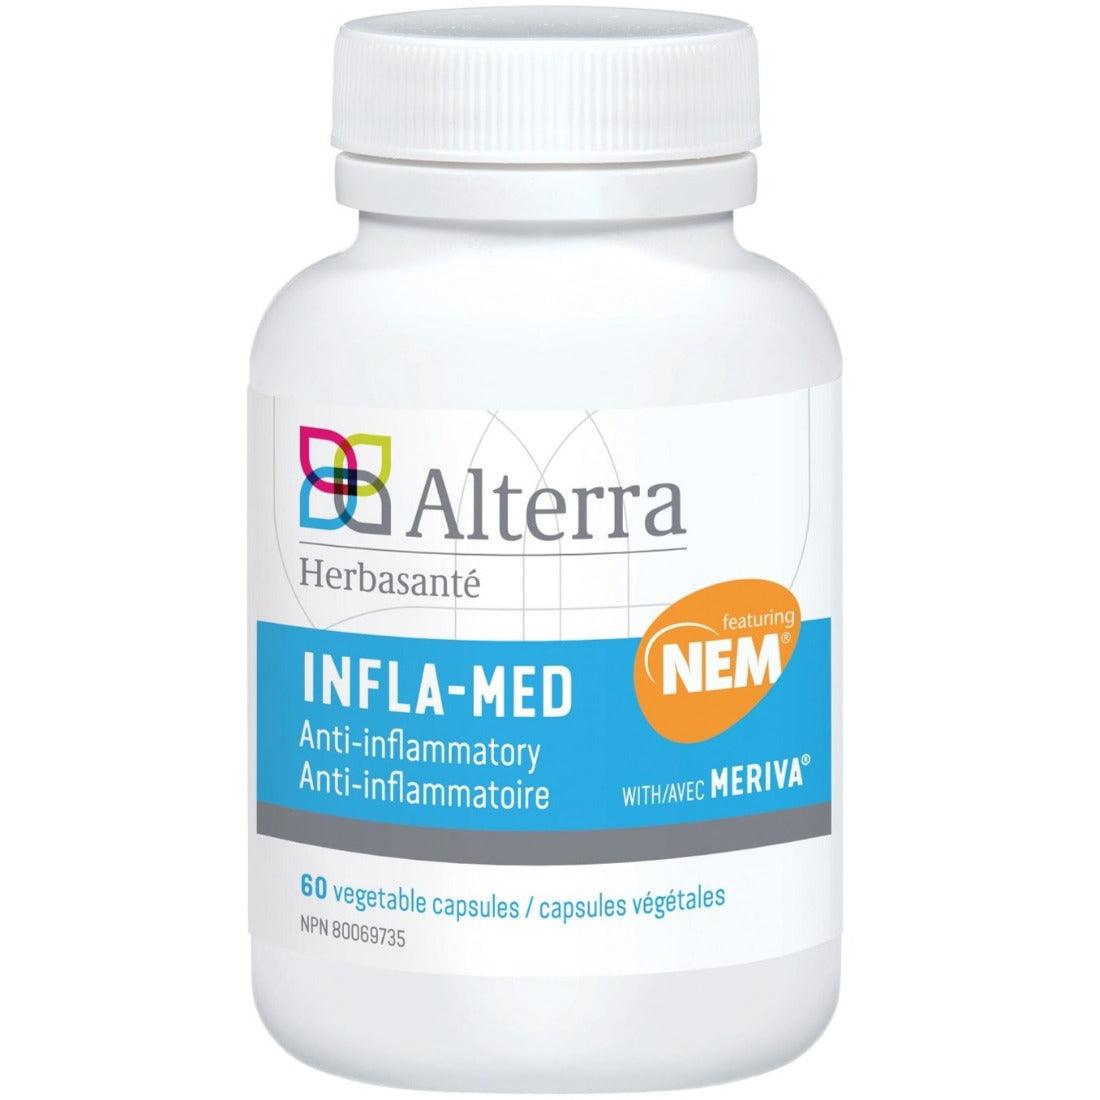 Alterra Infla-Med 60 Veggie Caps Supplements - Pain & Inflammation at Village Vitamin Store